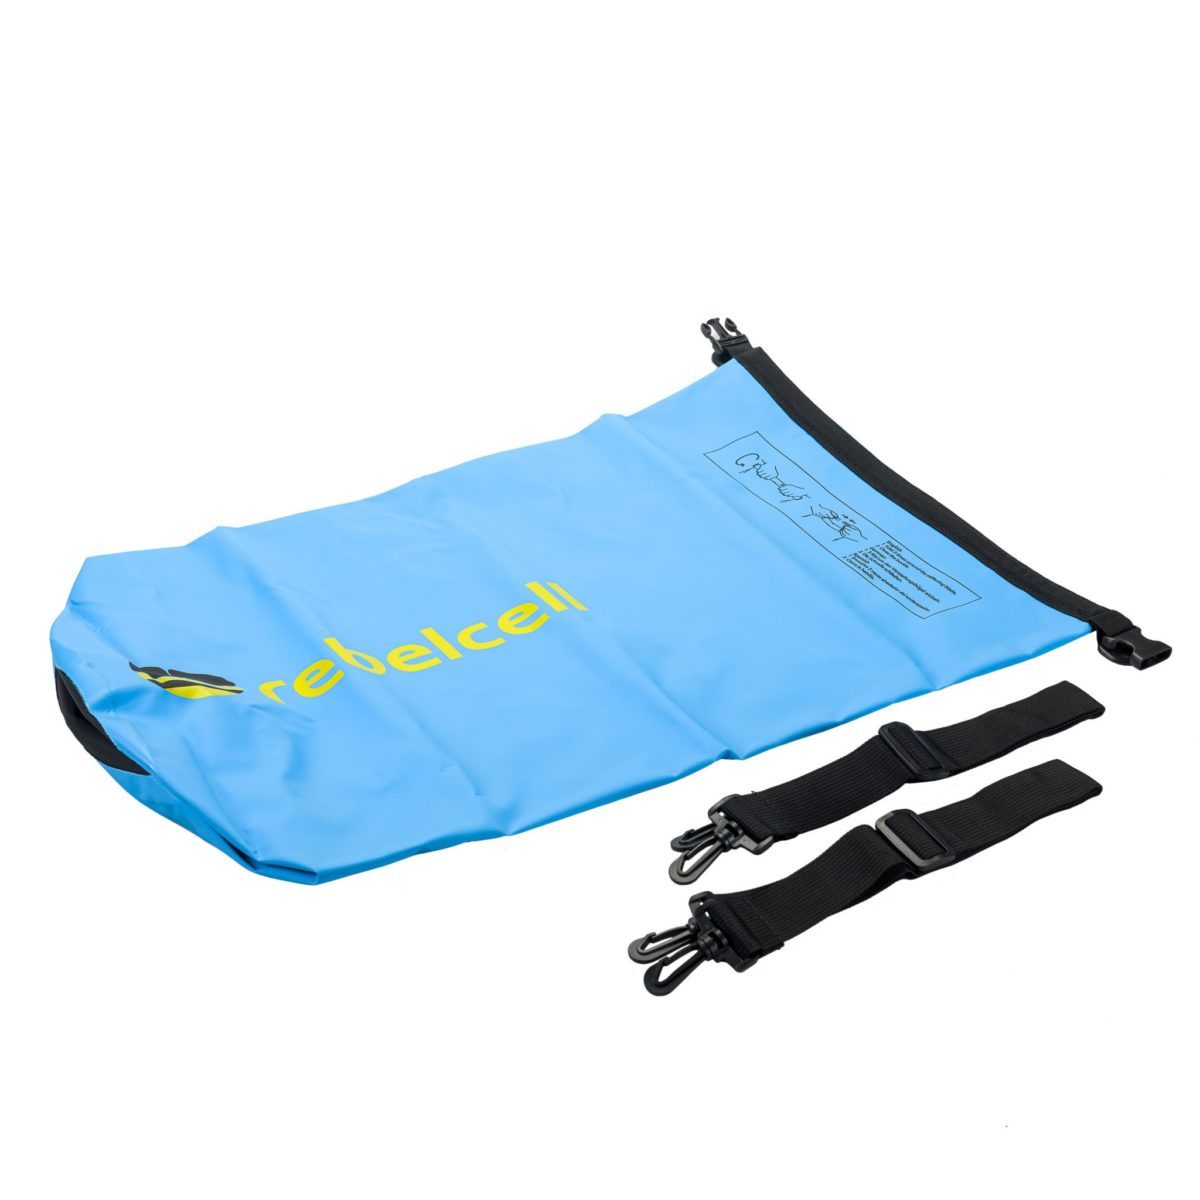 Rebelcell Dry Bag Large (40L) product image